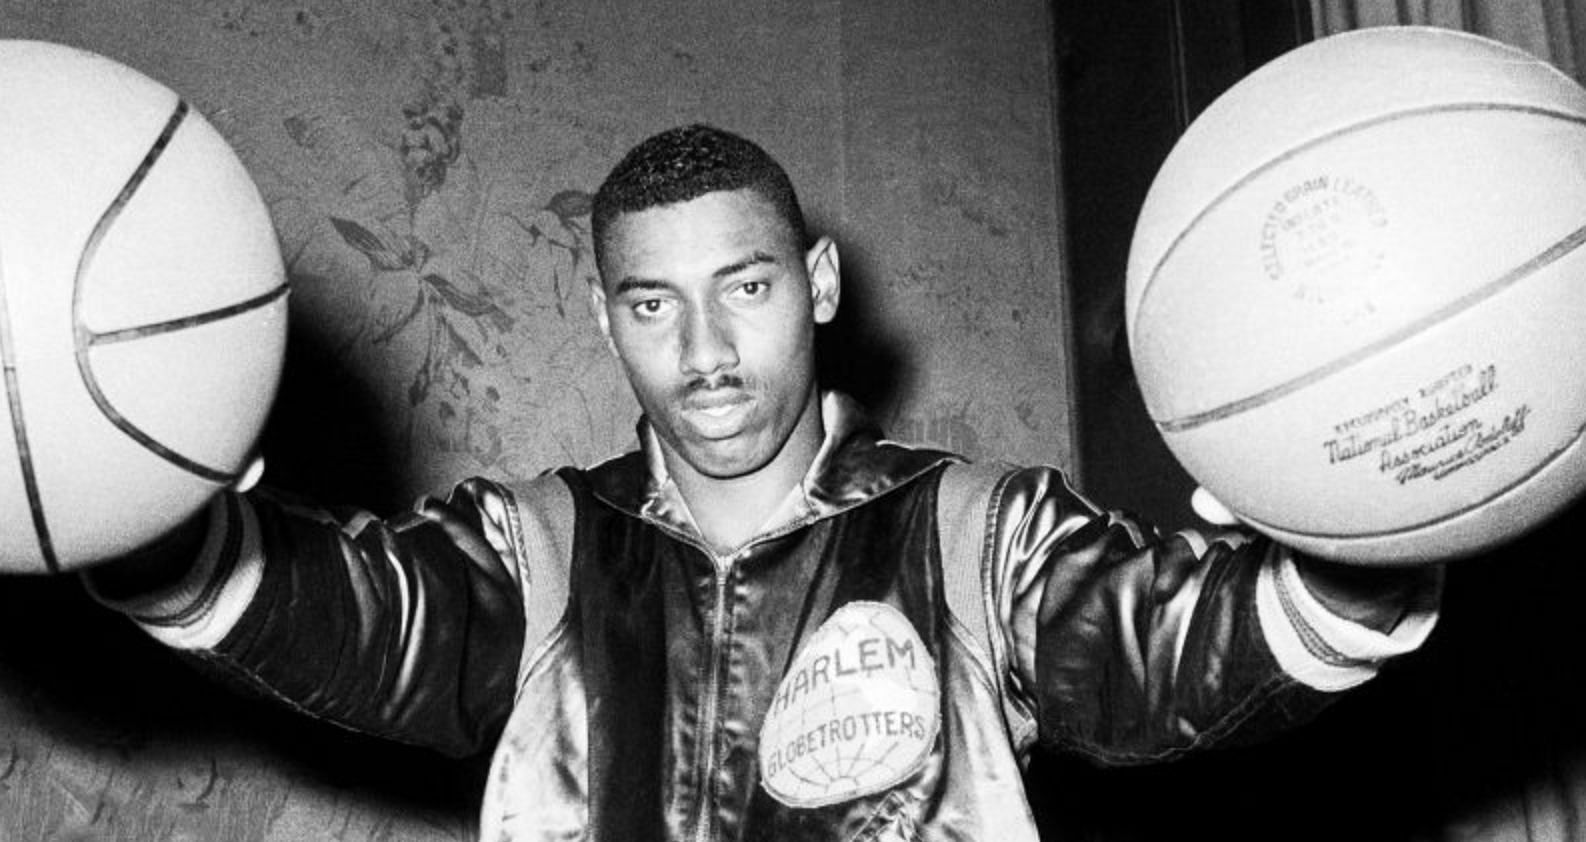 The Legacy Of Wilt Chamberlain's 100-Point Game